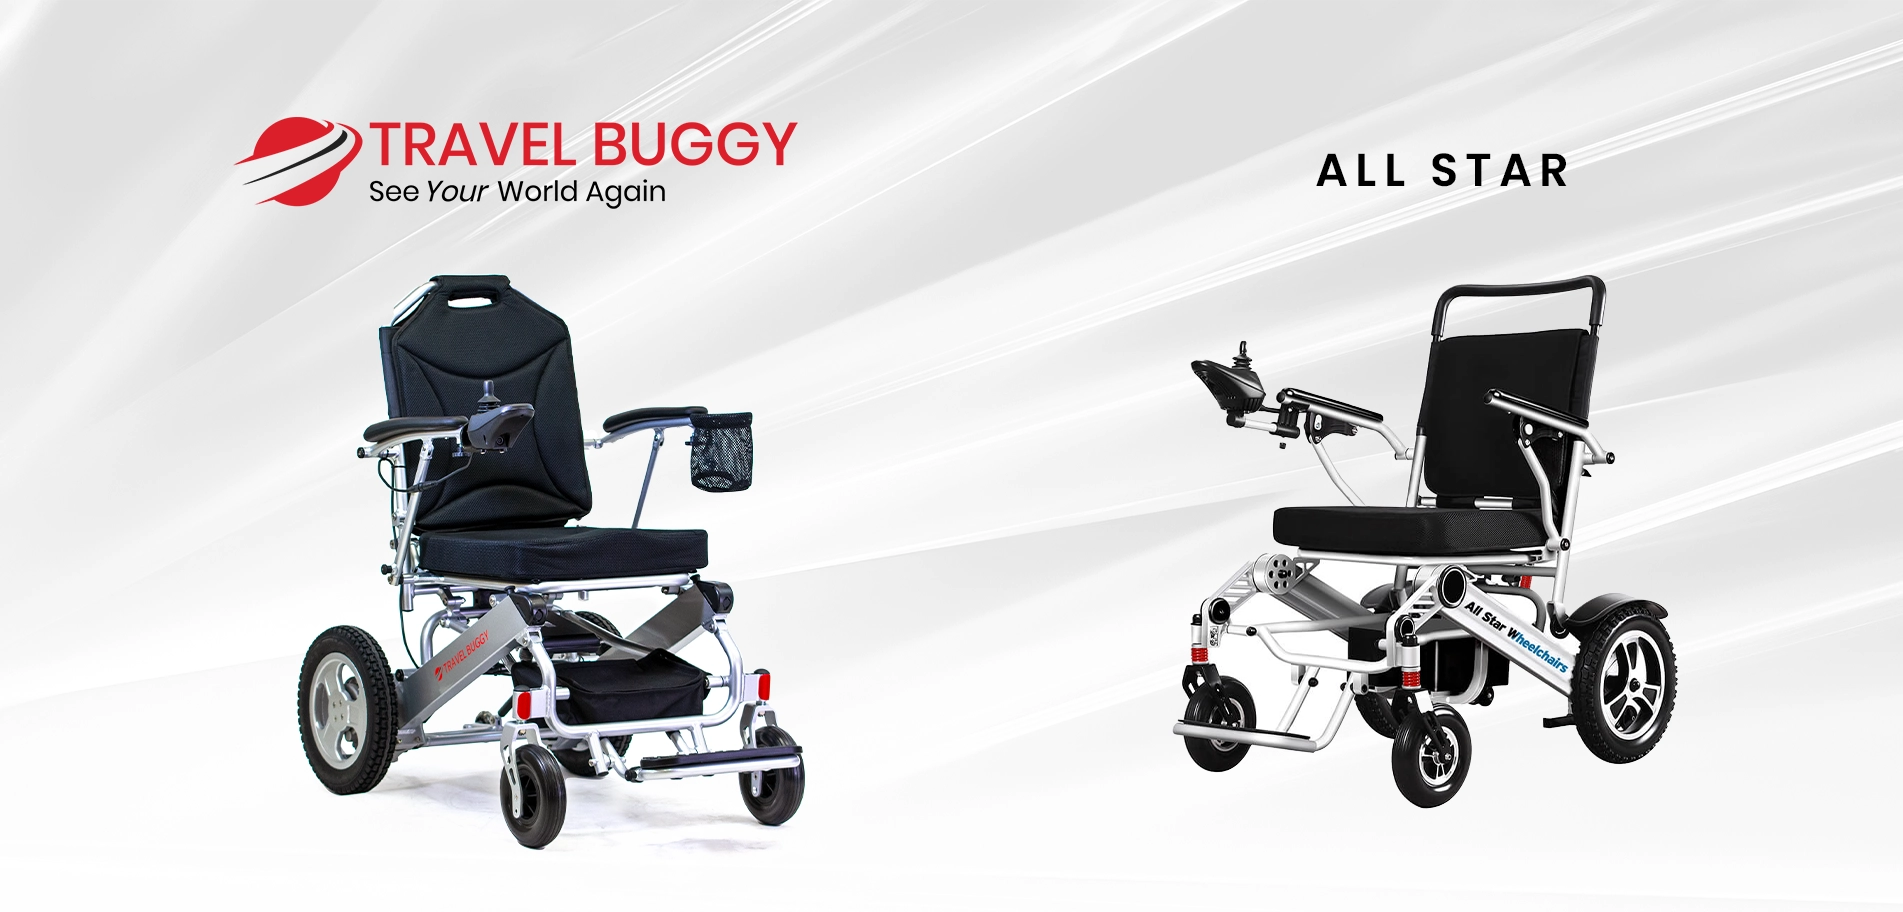 Travel Buggy electric wheelchair vs All Star power chair